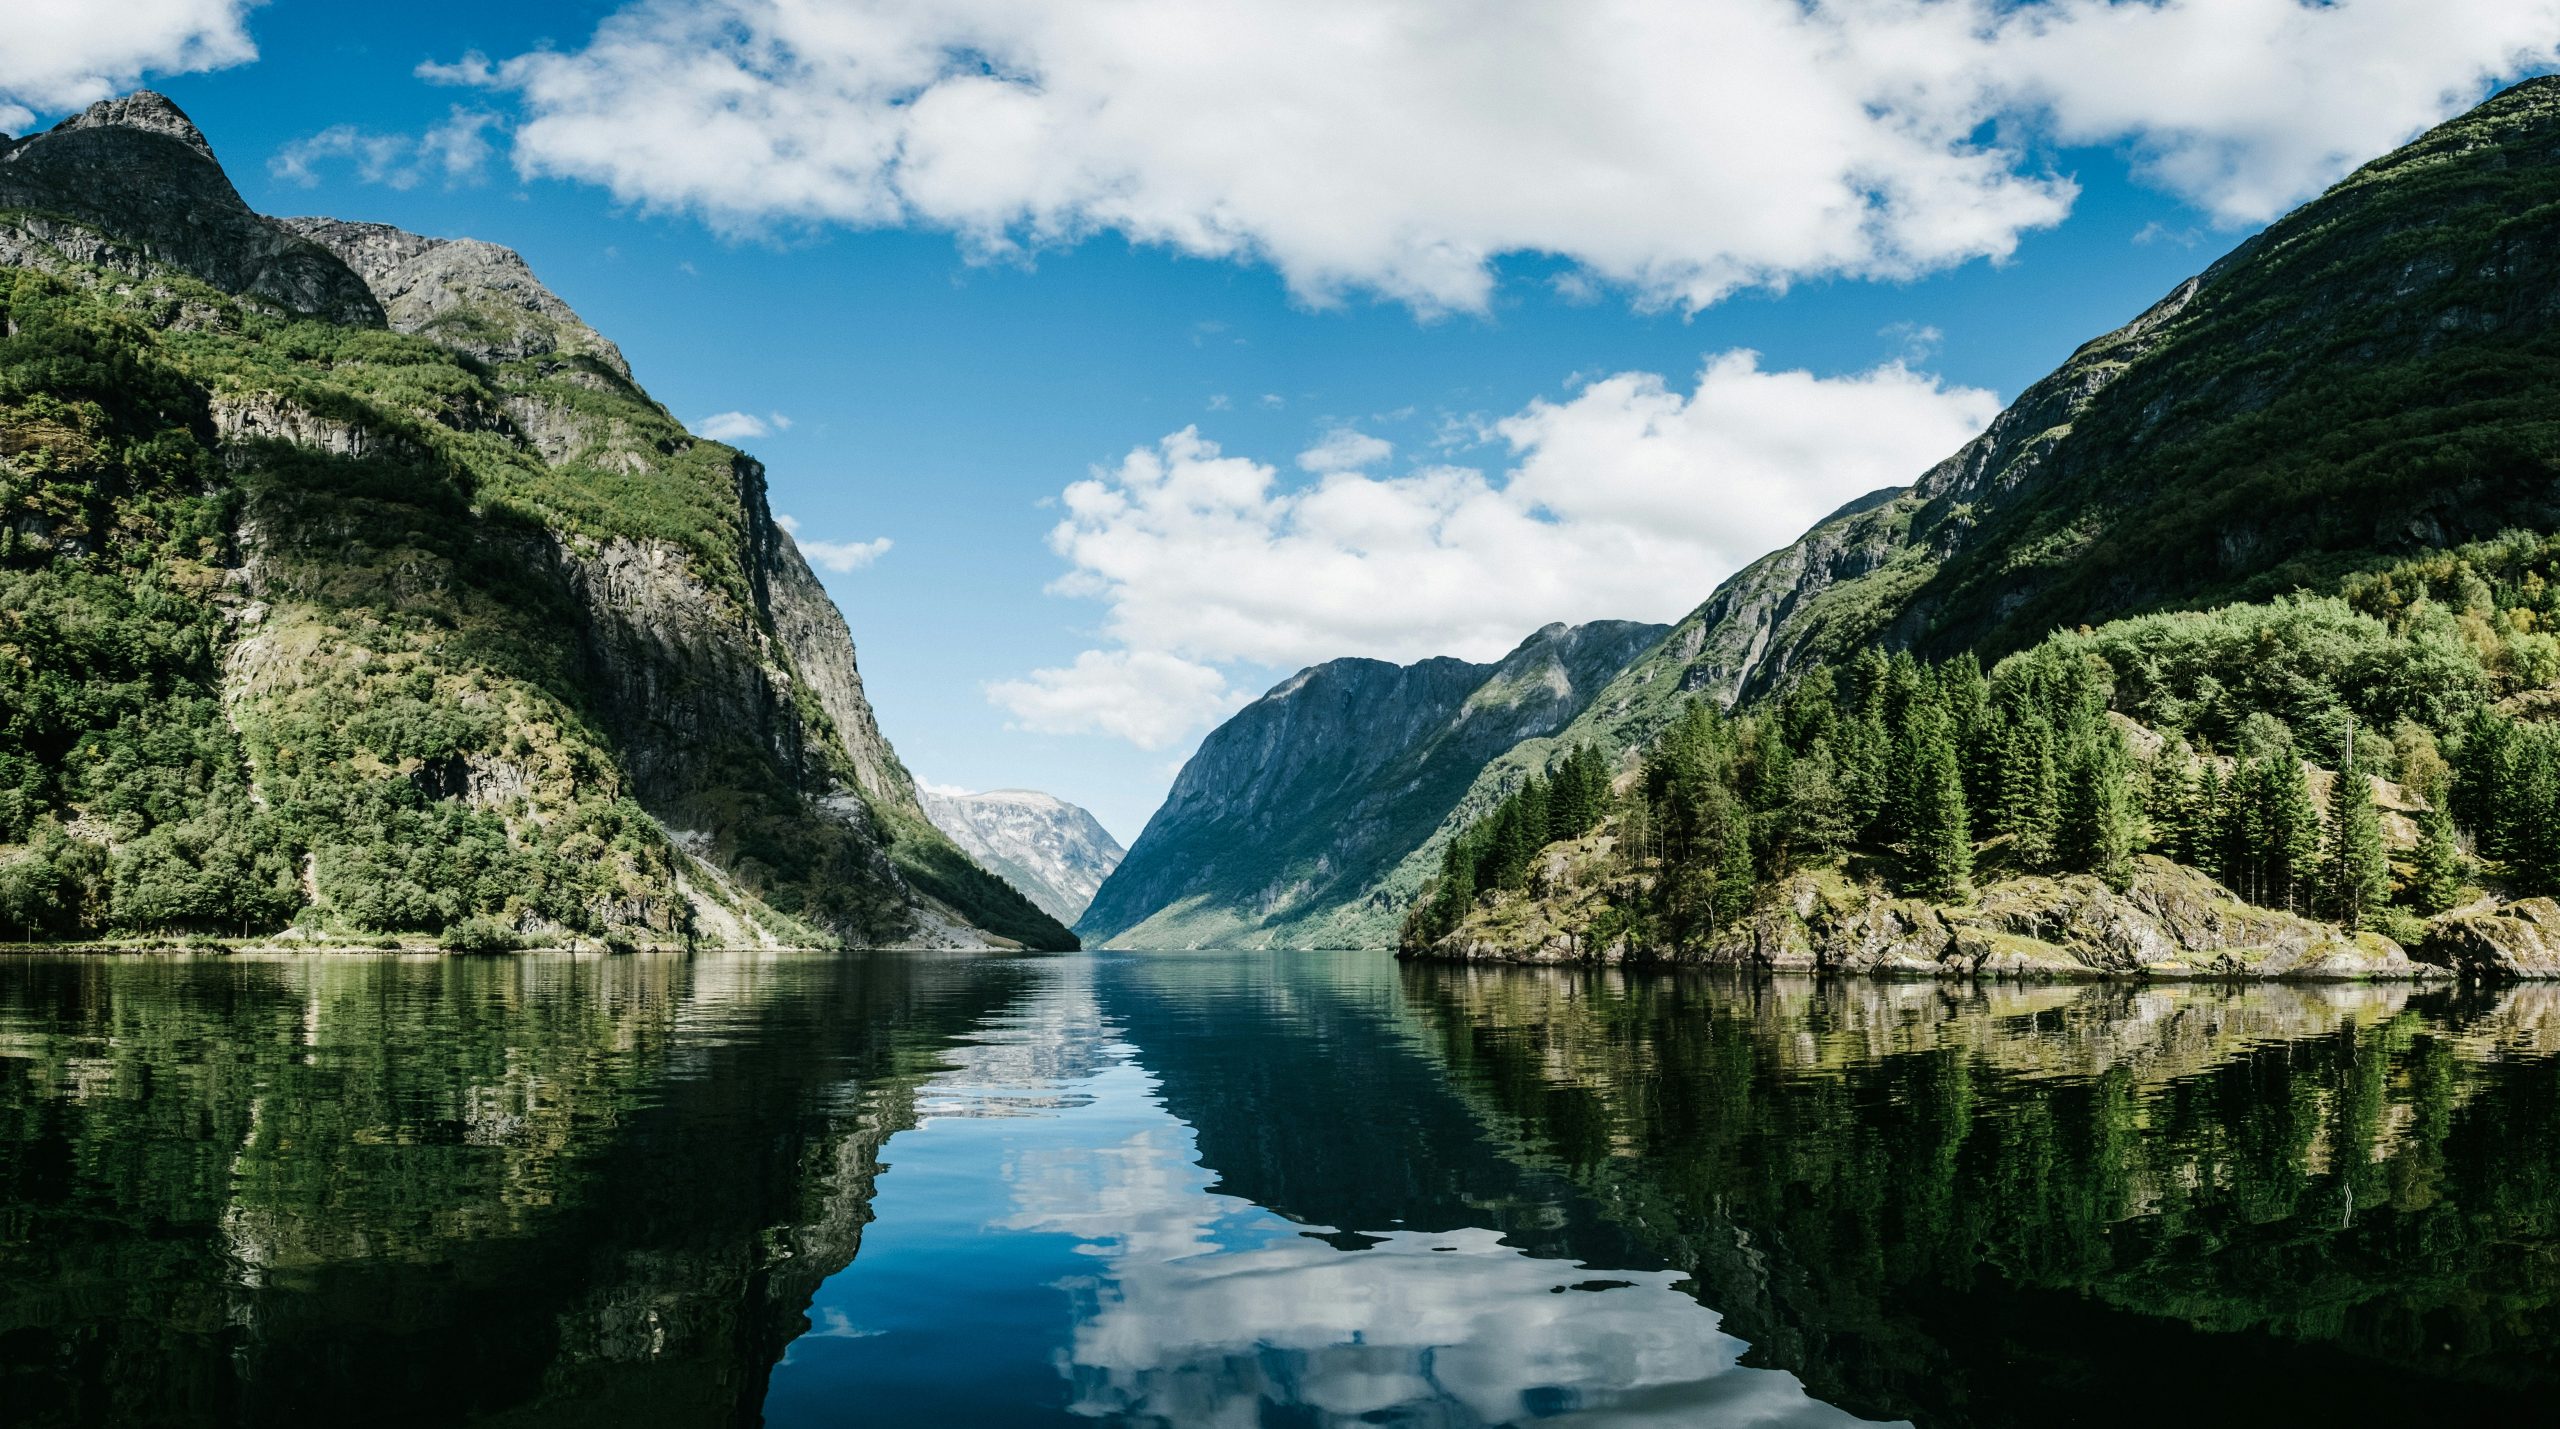 discover the breathtaking beauty of fjords with our immersive travel guide. plan your next unforgettable adventure surrounded by stunning natural landscapes.